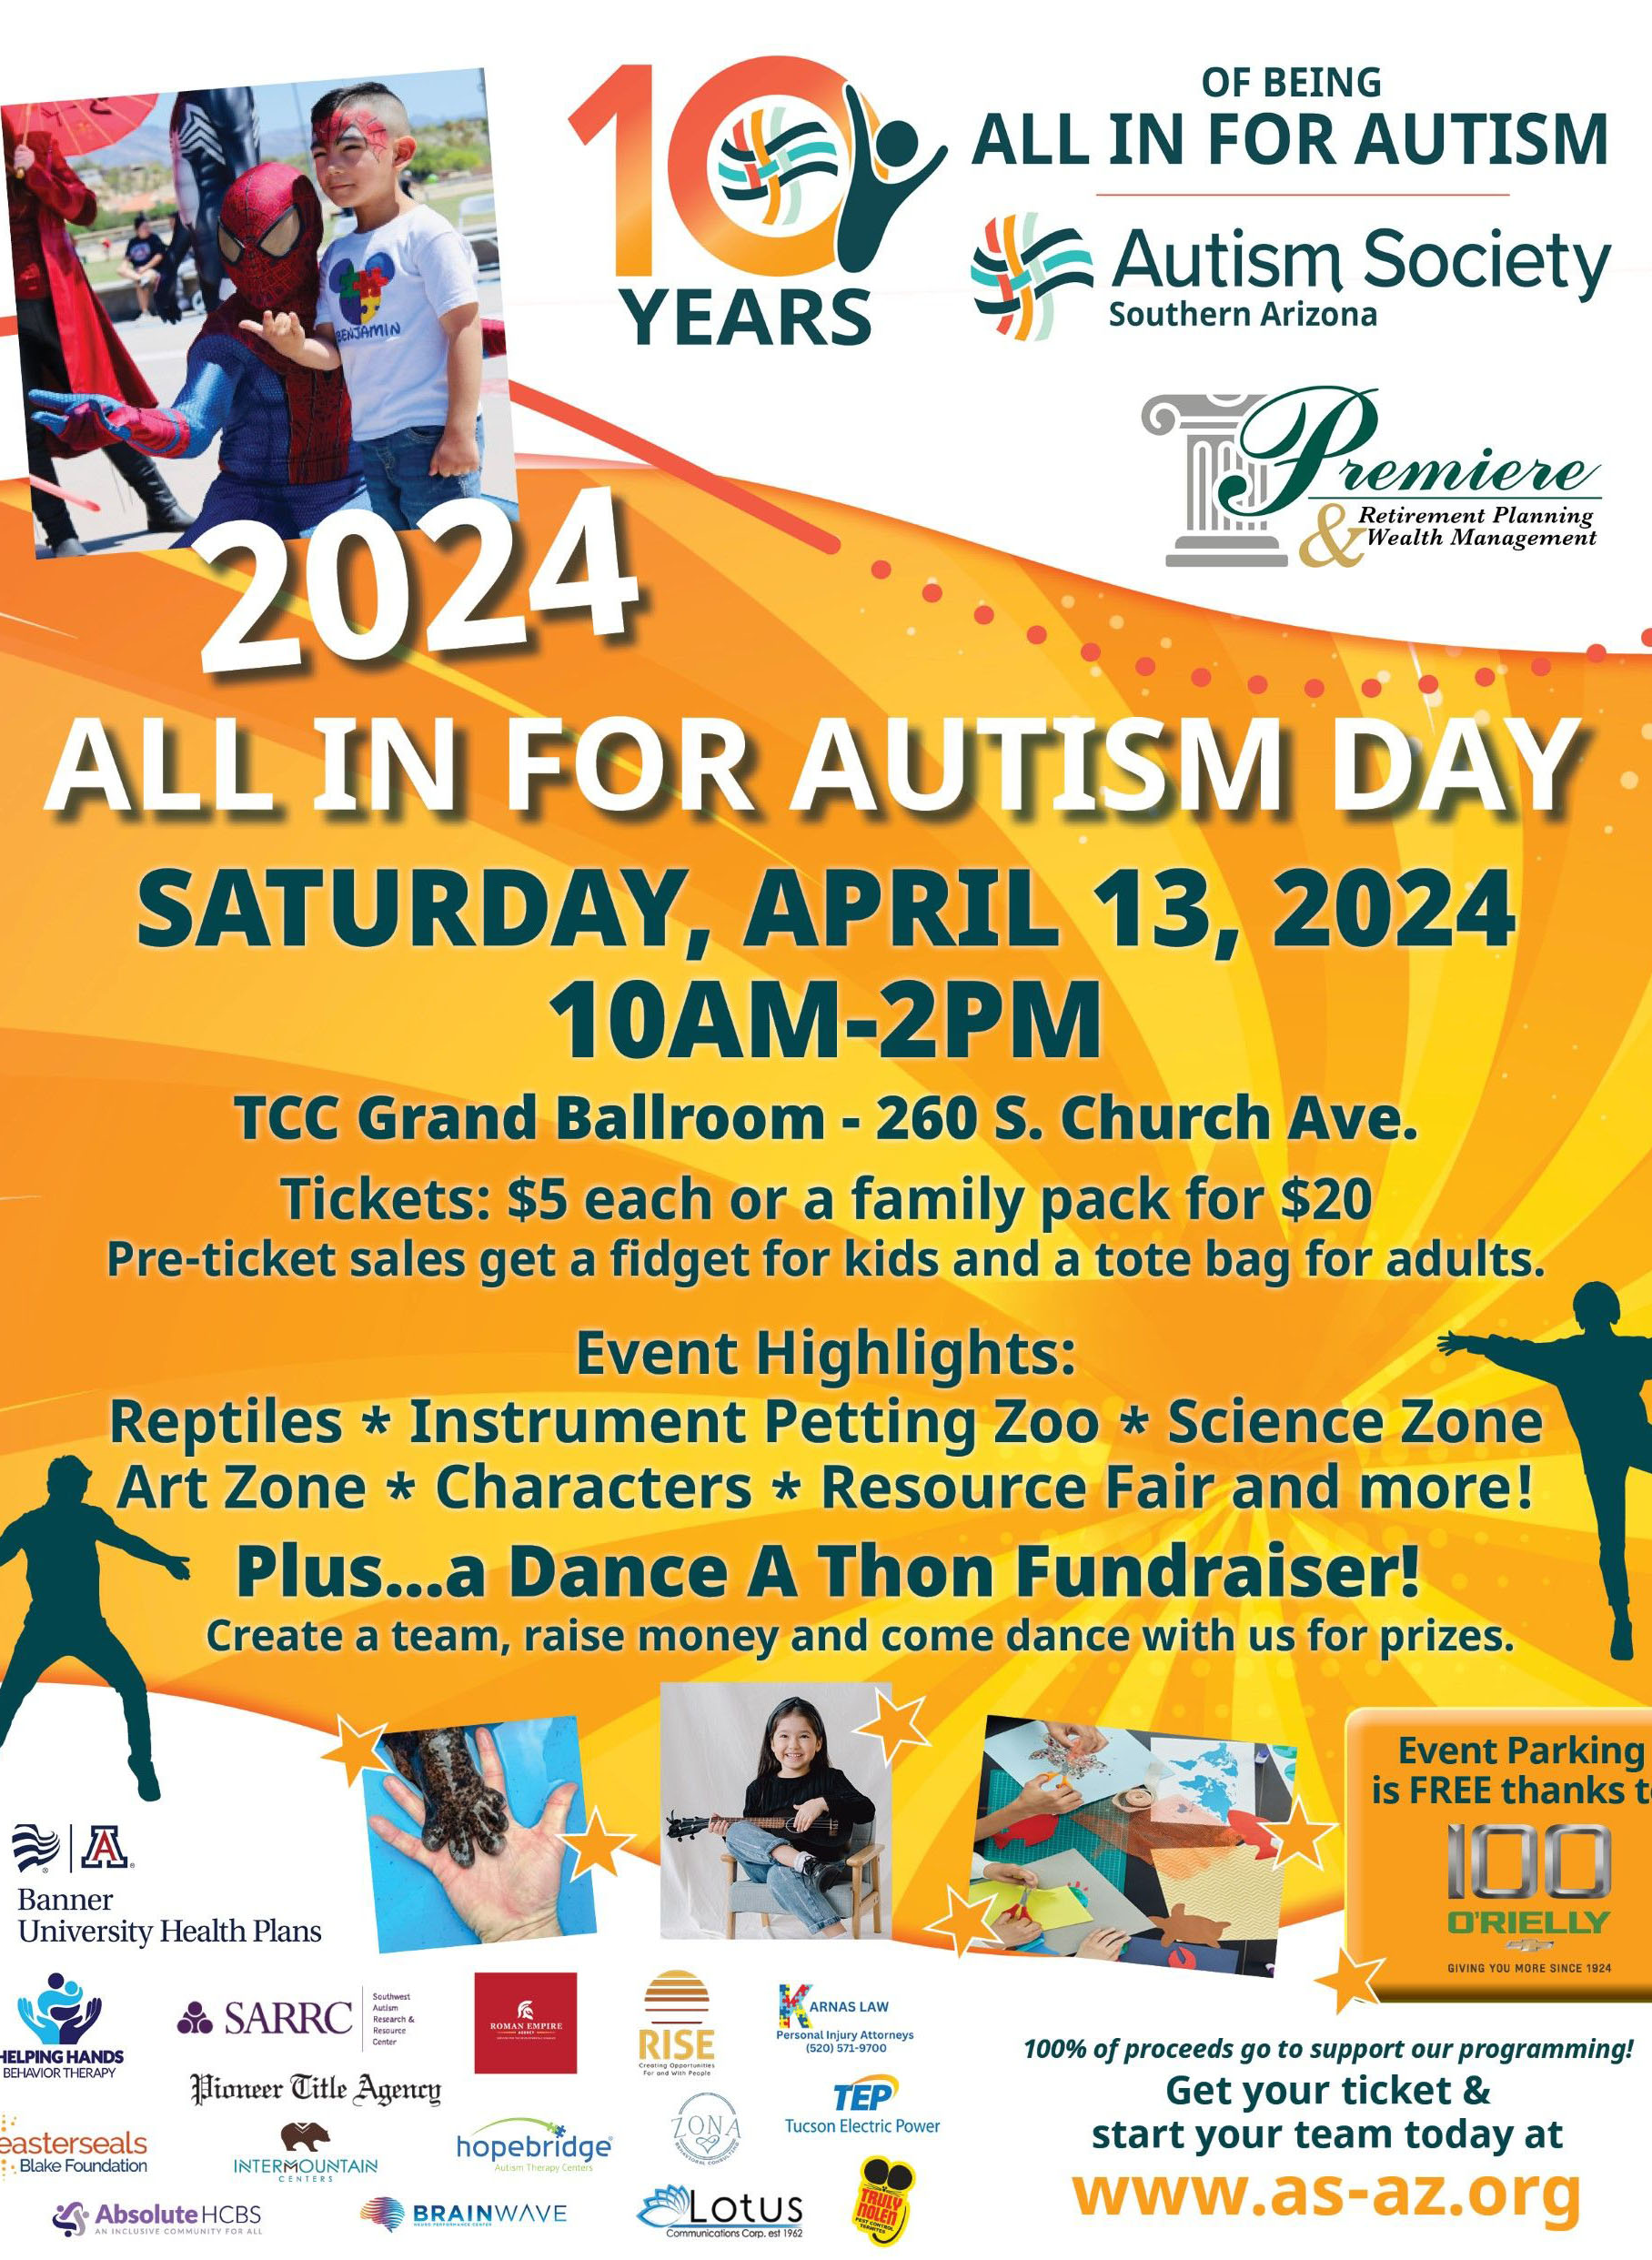 Autism Society 2024 view larger